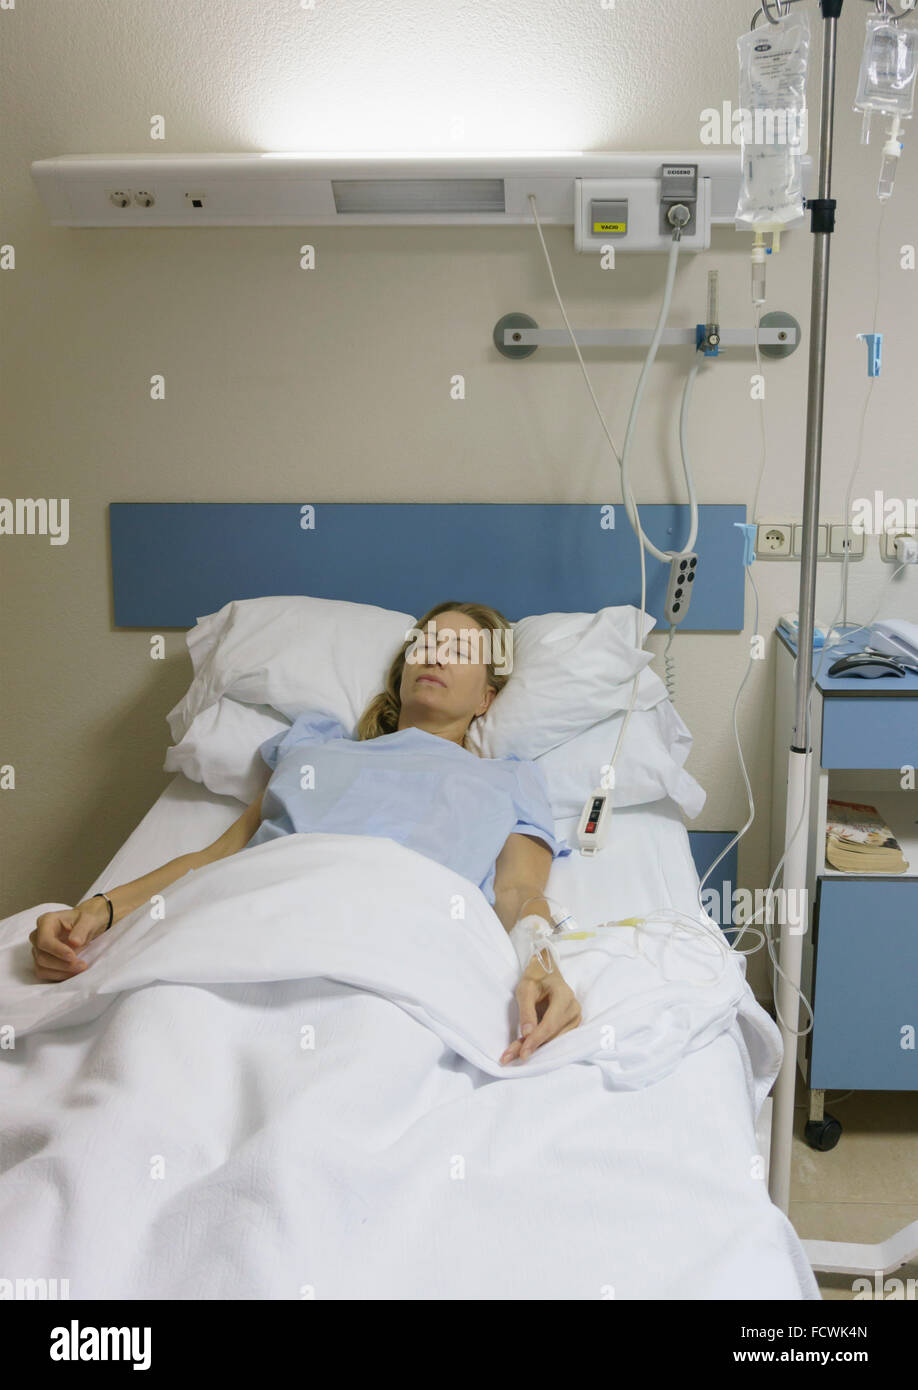 Woman, 35-40 years old, sedated and lying in hospital bed after operation. Stock Photo